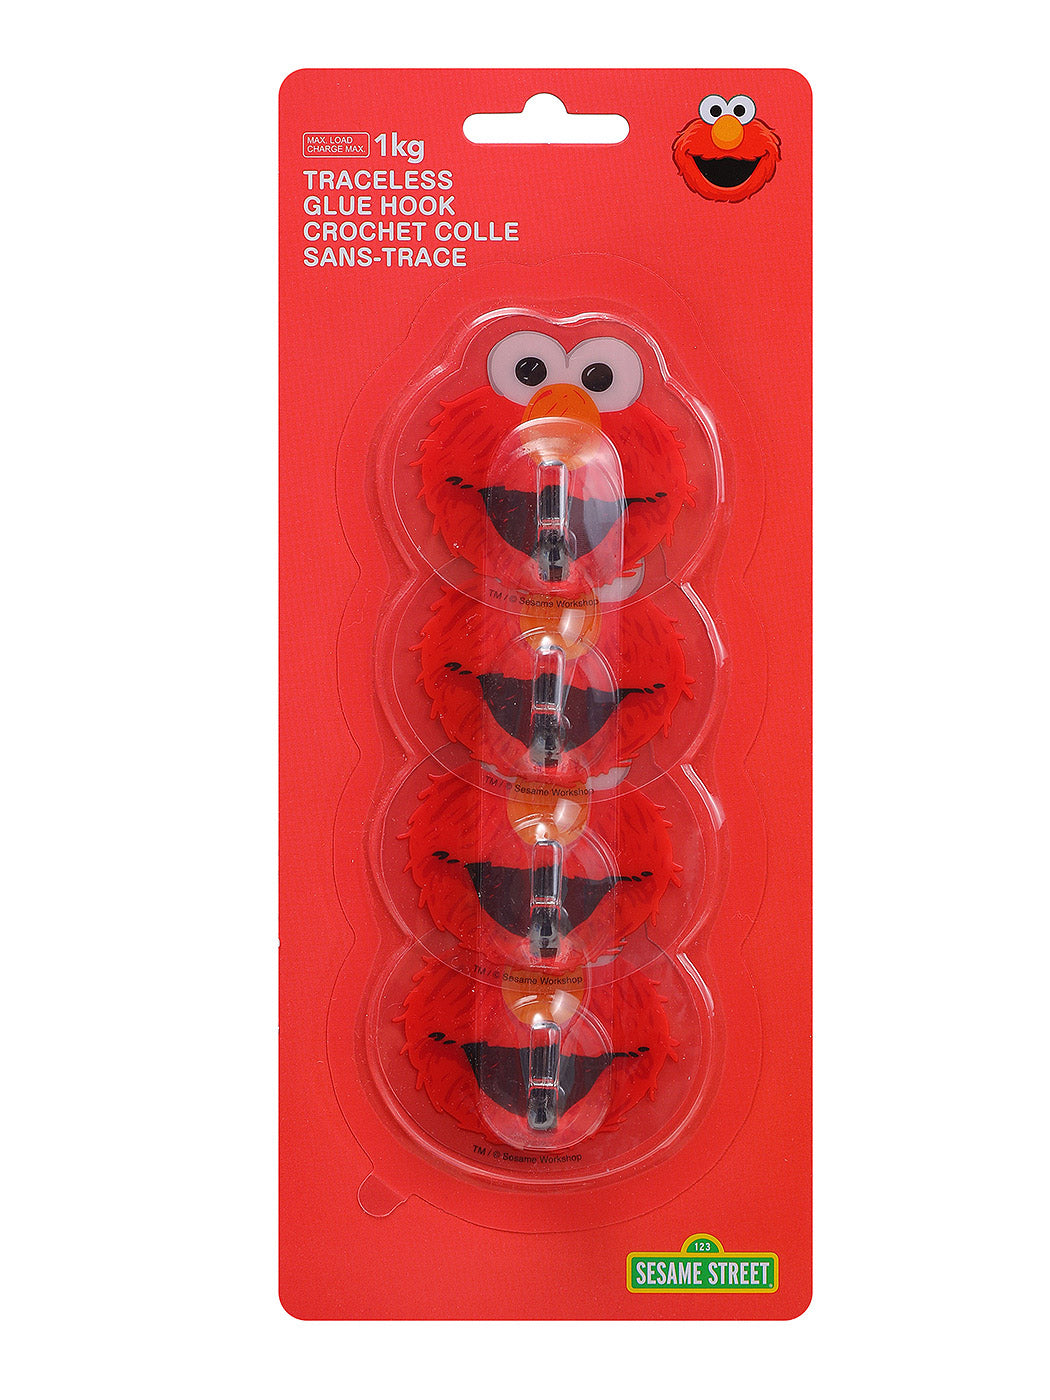 MINISO Sesame Street Traceless Glue Hook – Miniso Philippines Official